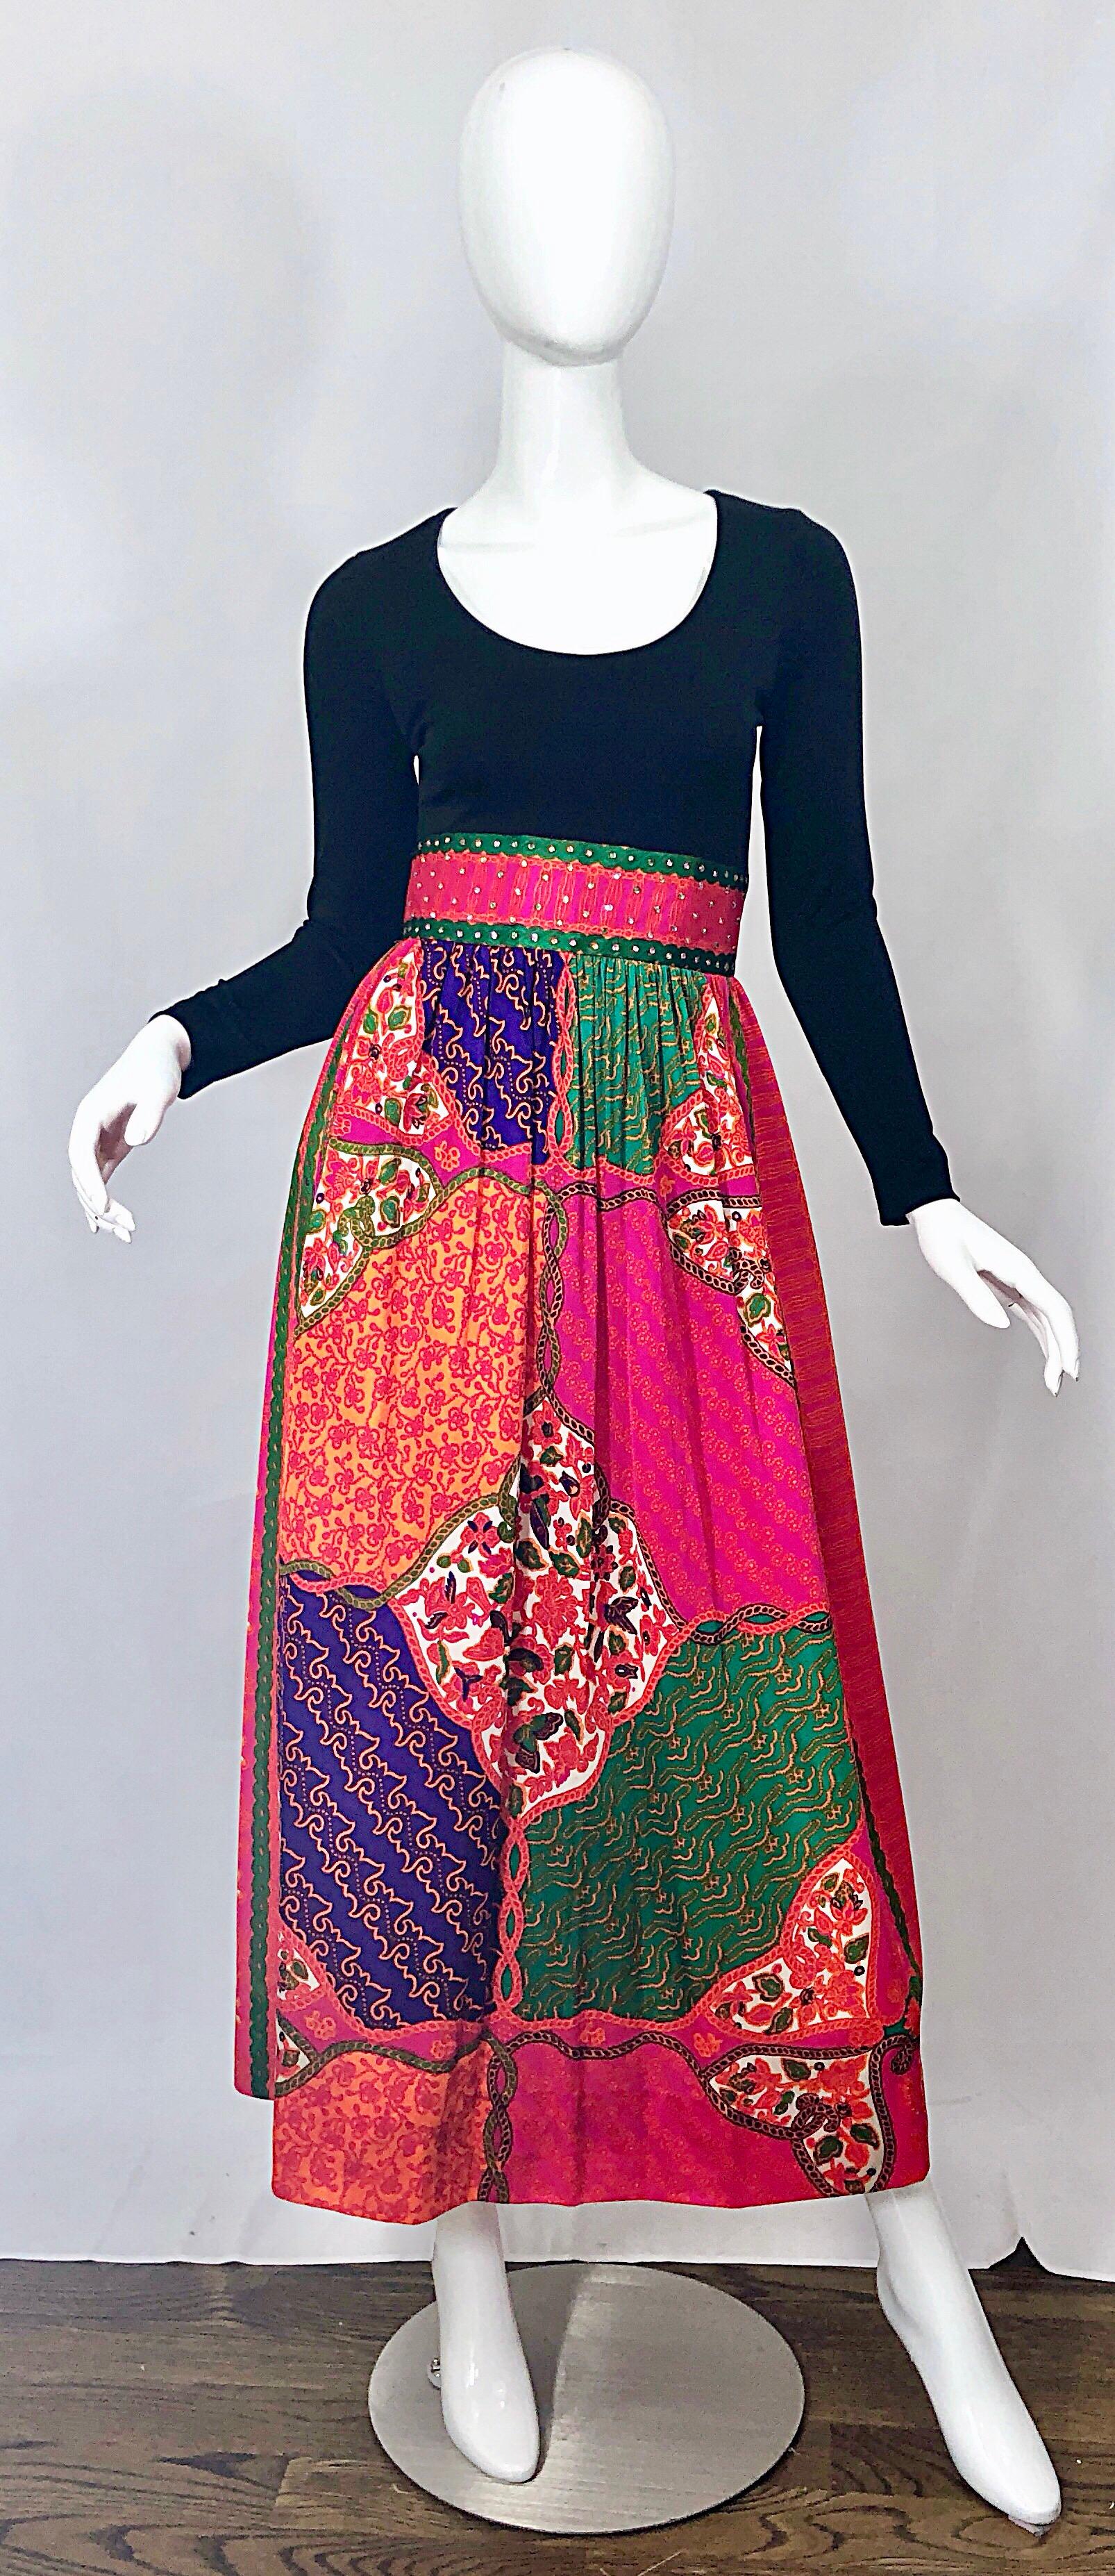 Amazing vintage 1970s rhinestone encrusted multi color patchwork print jersey maxi dress! Features a tailored black scoop neck jersey bodice. Dozens of hand sewn rhinestones at waist, with a full patchwork printed maxi skirt. Features vibrant colors